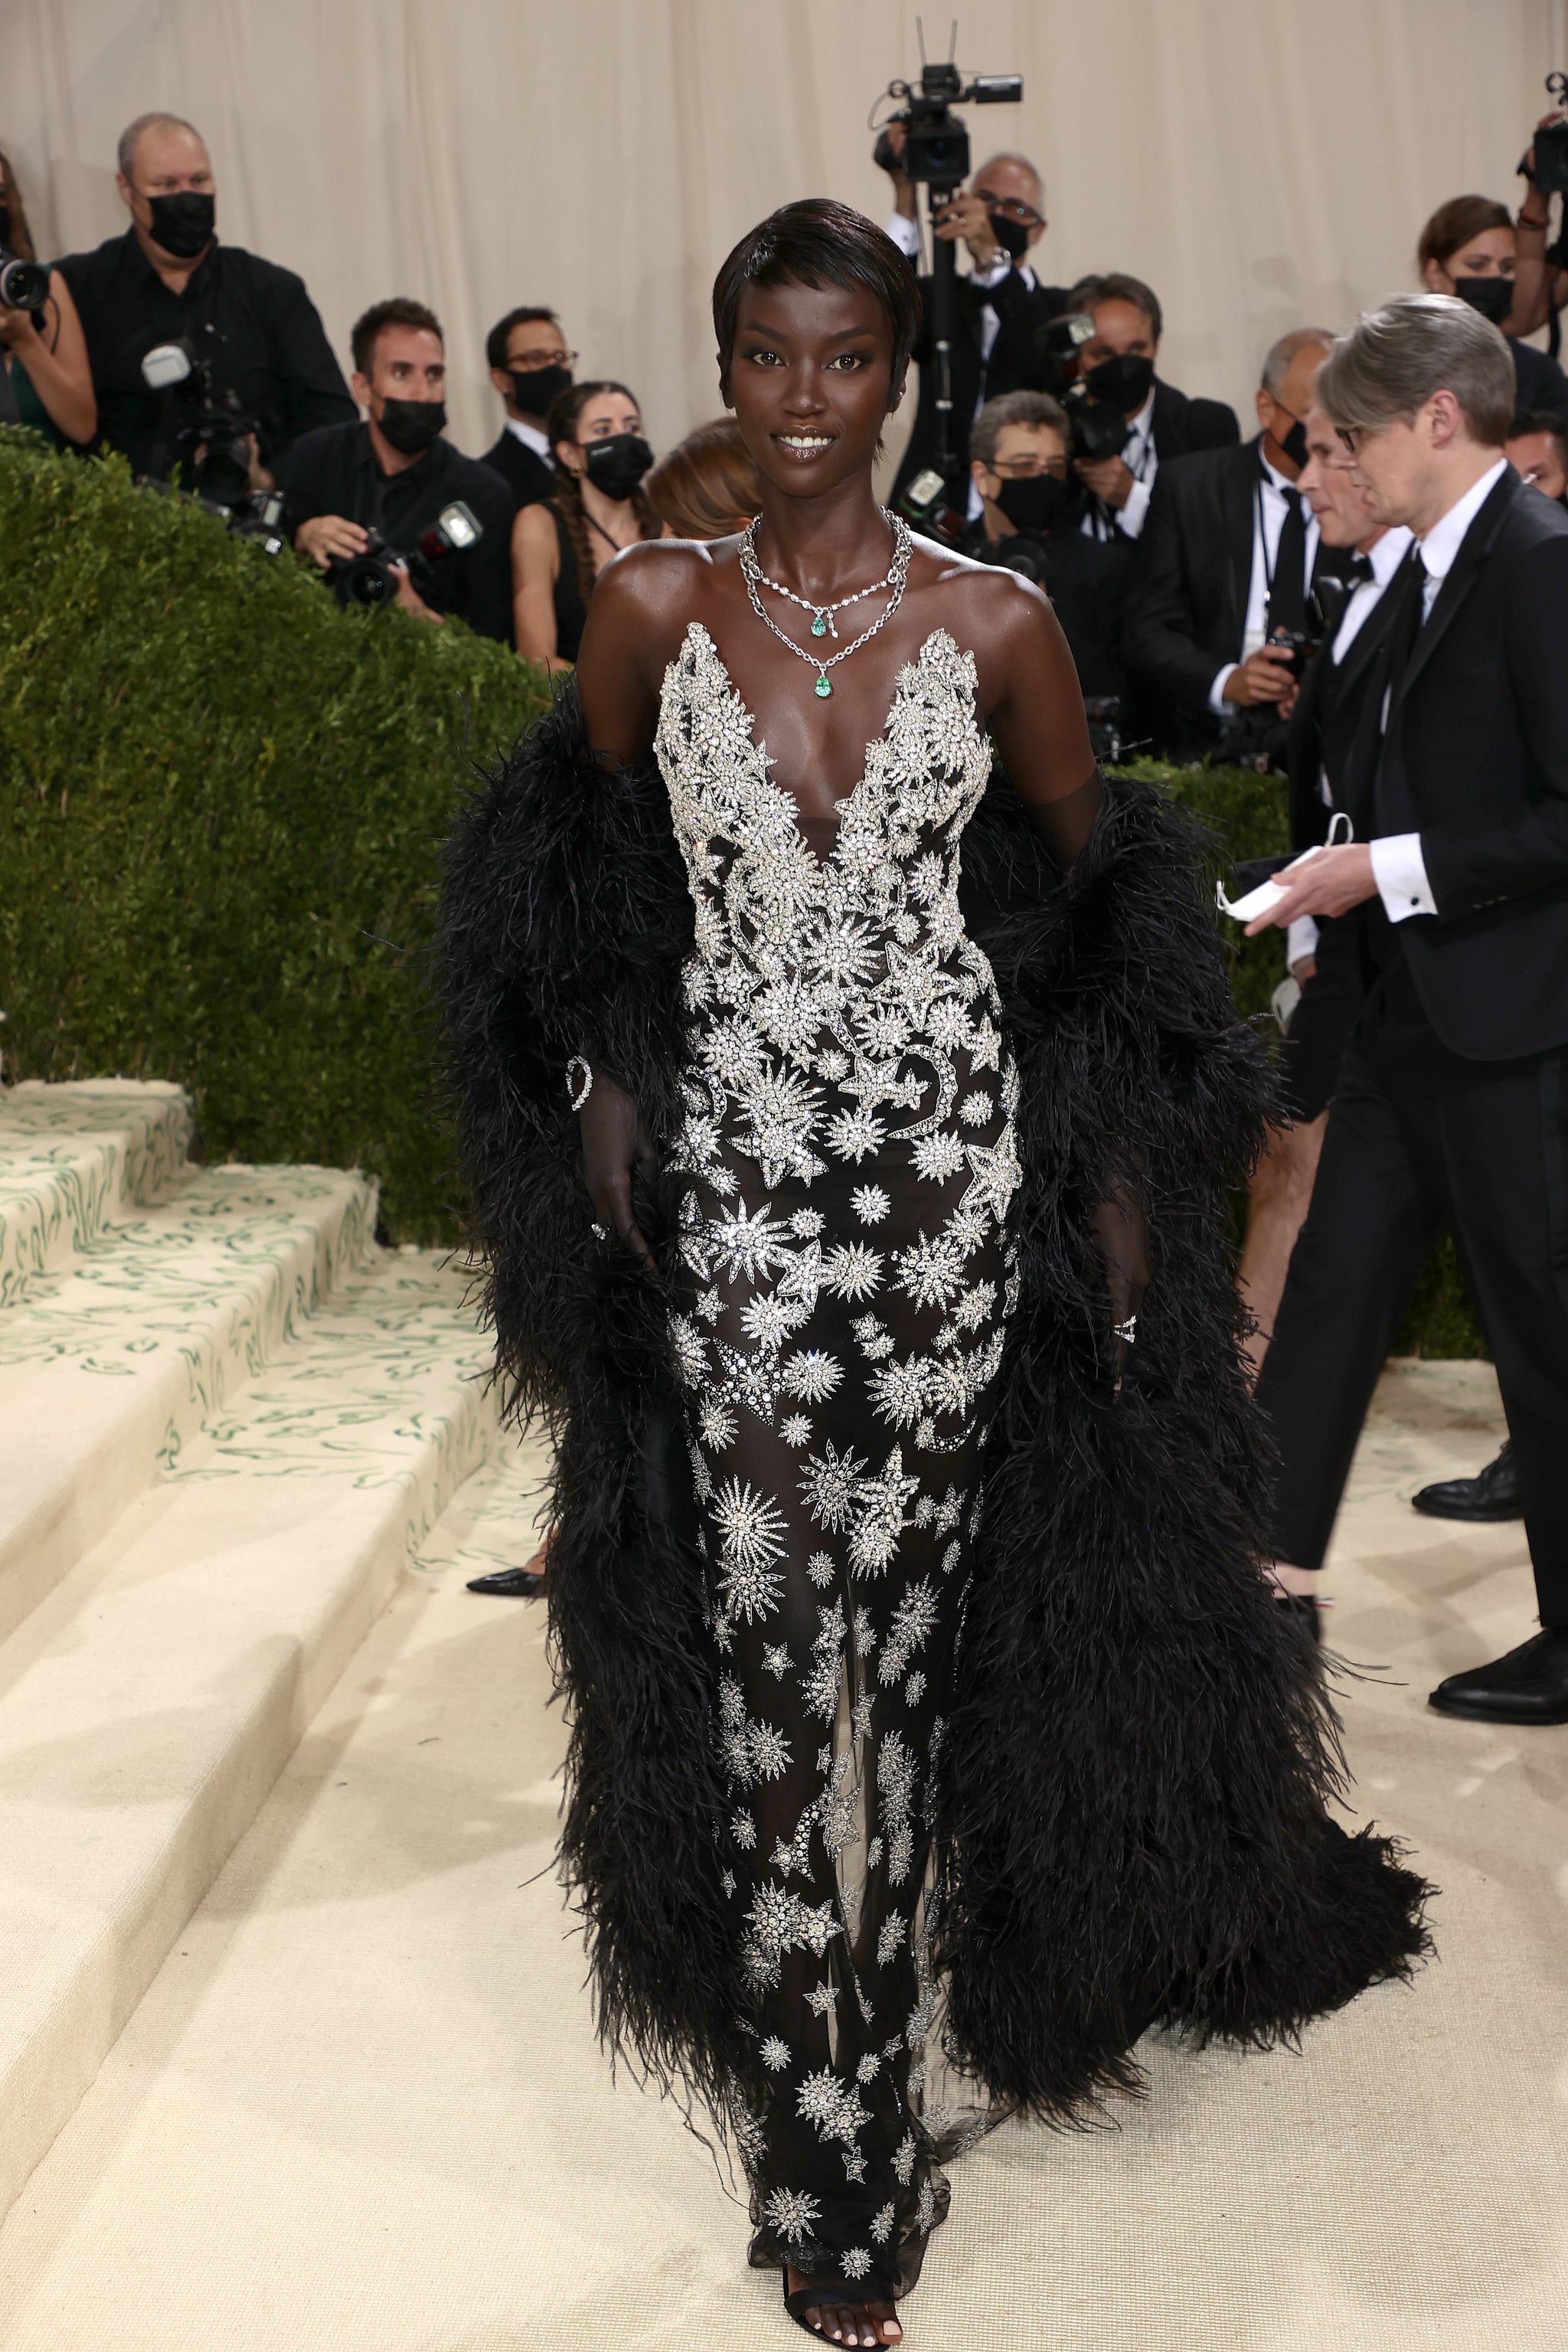 IMAGINE GOING VIRAL AND ATTENDING THE MET GALA 4 YEARS LATER | Somali ...